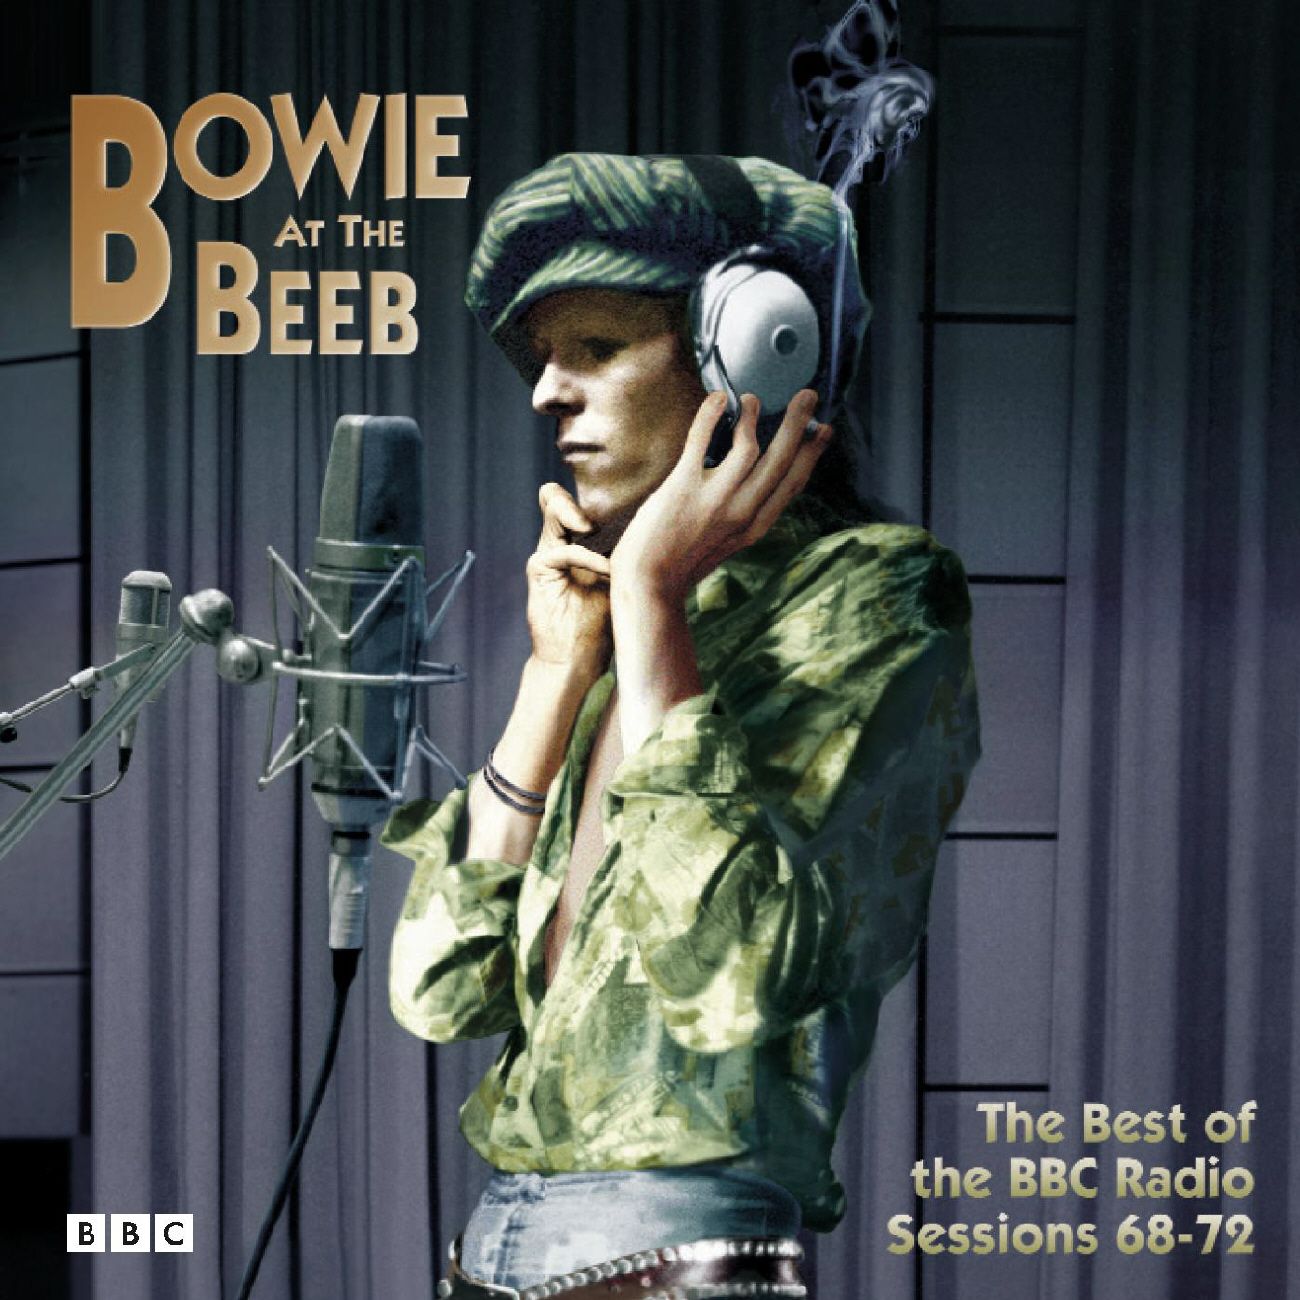 Bowie at The Beeb (The best of the BBC sessions 68-72)